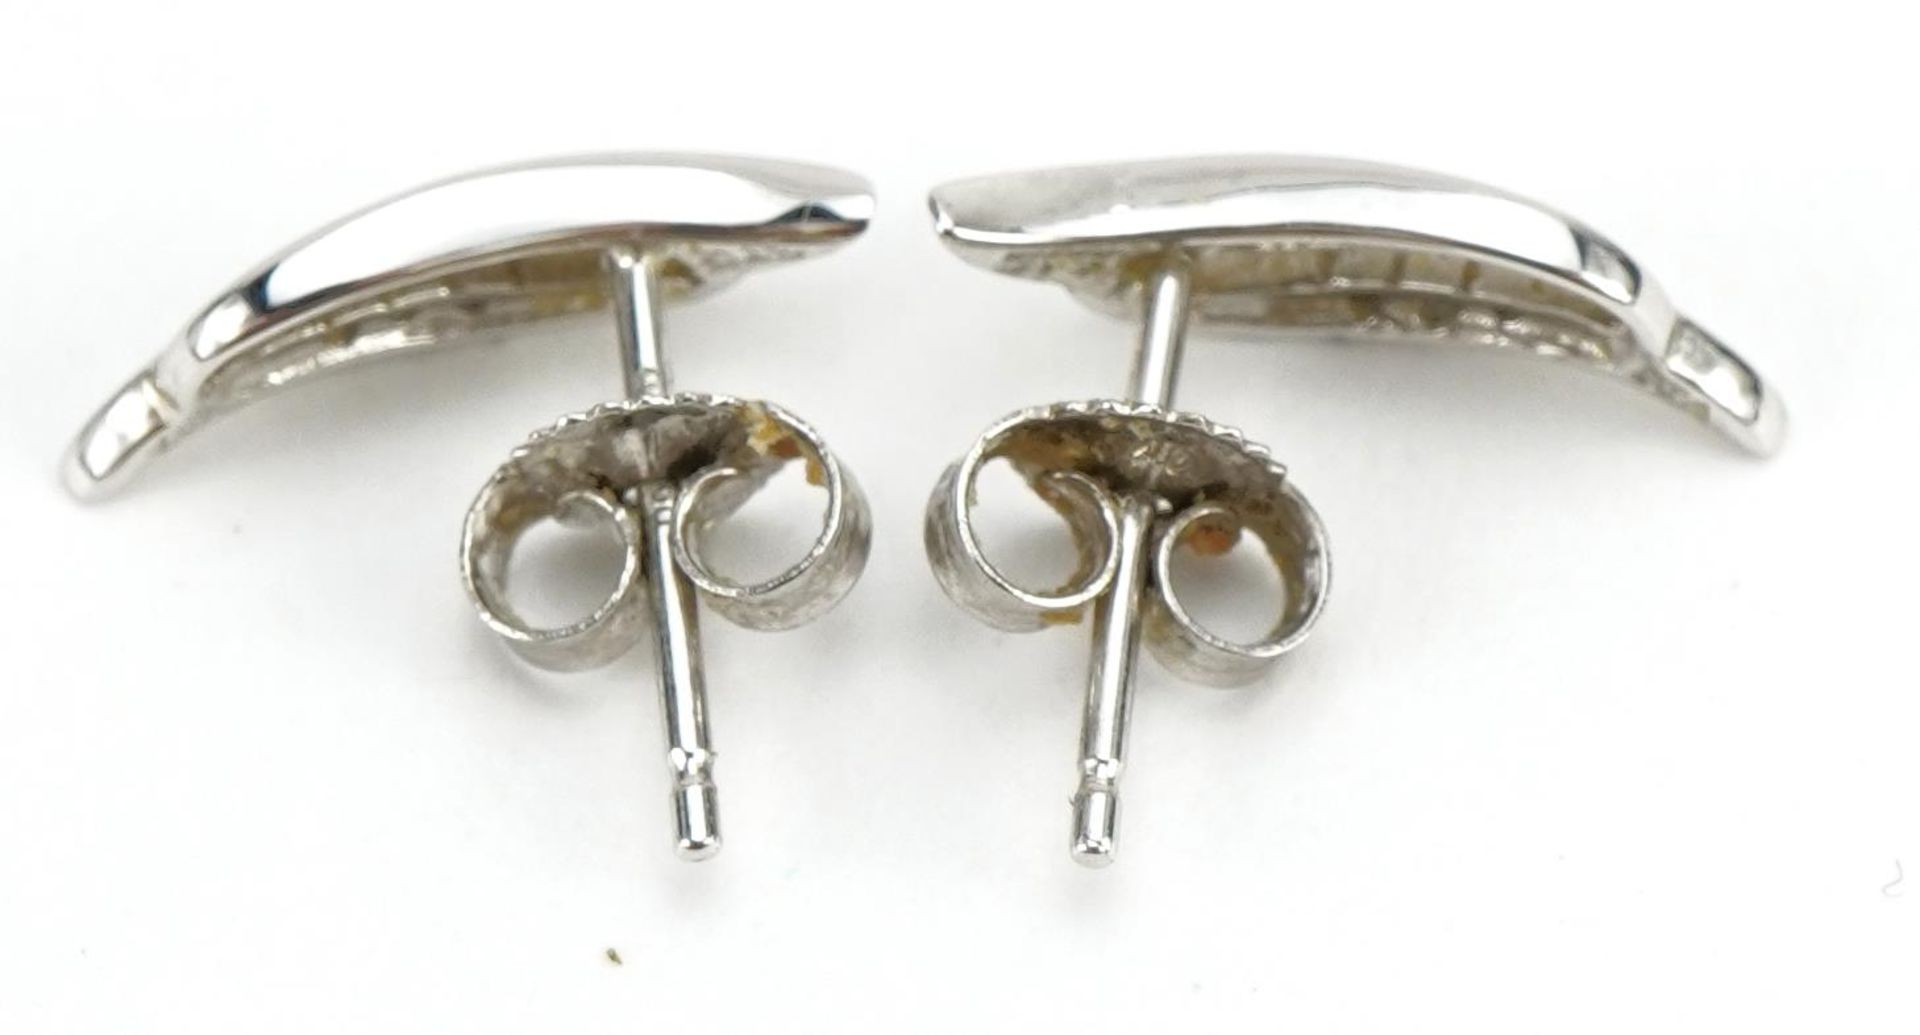 Pair of 9ct white gold diamond stud earrings, 1.4cm high, 1.2g : For further information on this lot - Image 2 of 2